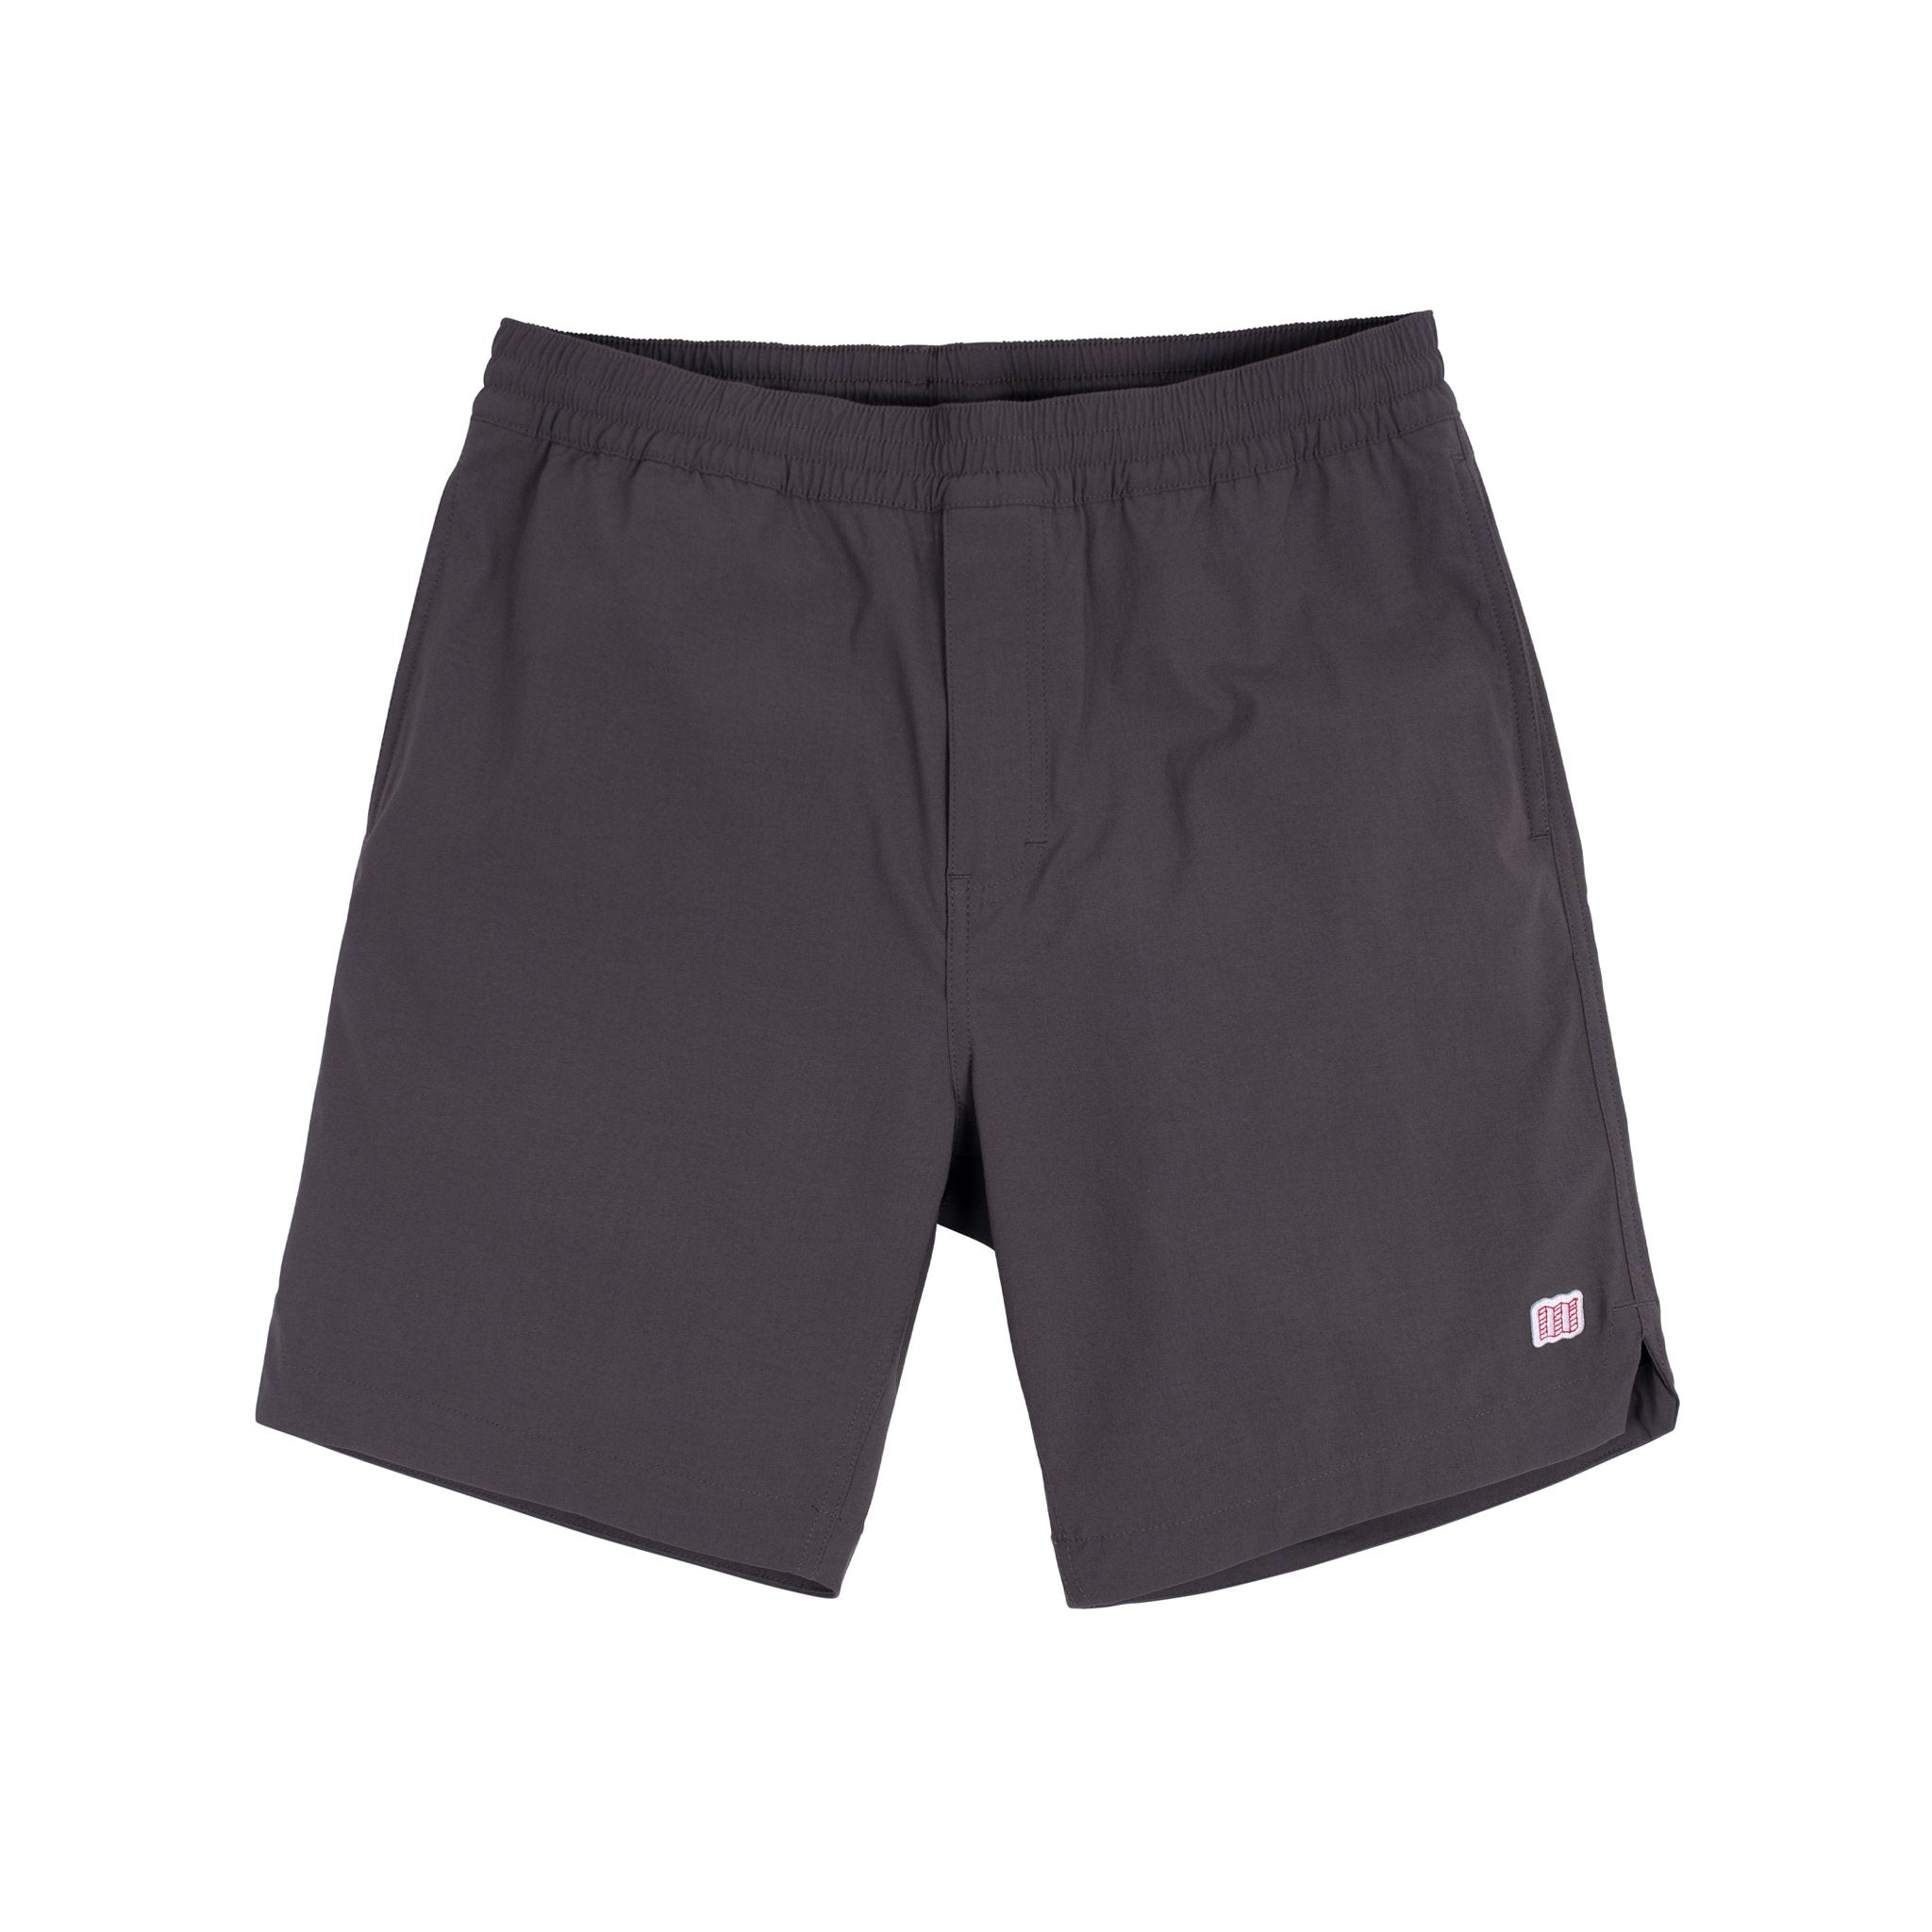 Topo Designs Men's Global lightweight quick dry travel Shorts in Charcoal gray.